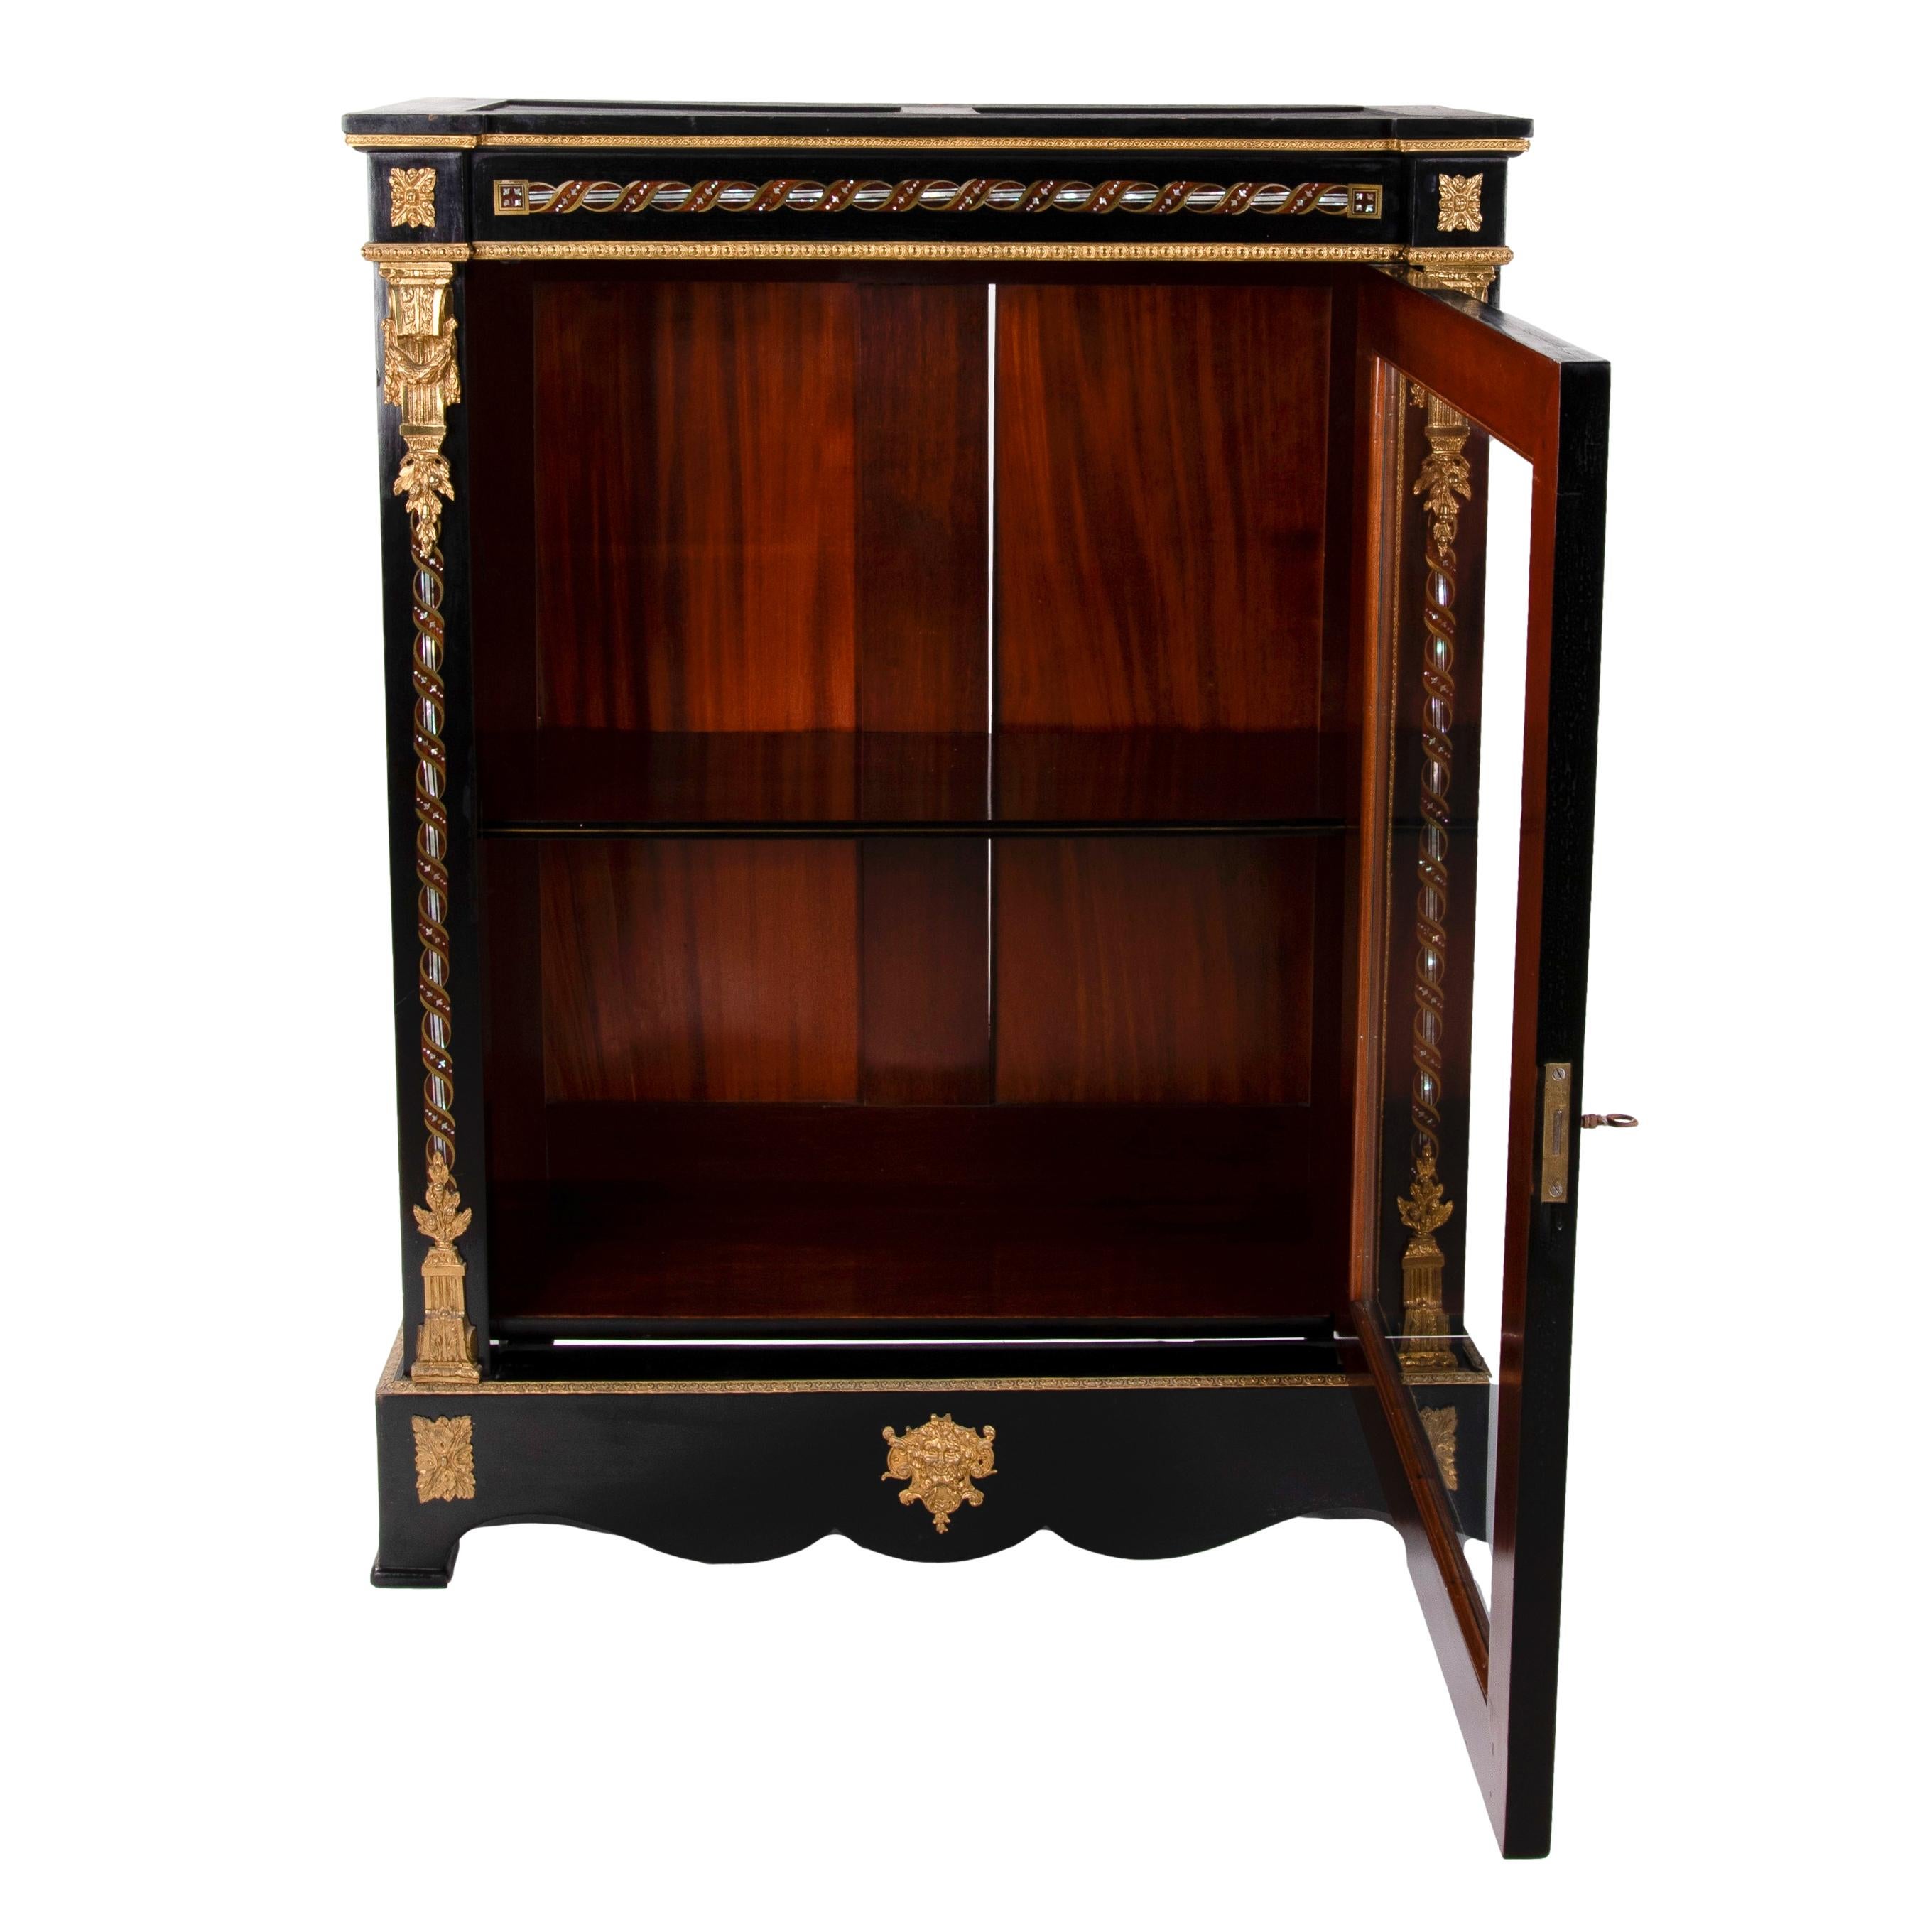 19th Century 1850s French Ebonized Wood Pier Cabinet w/ Gilt Bronze & Mother of Pearl Inlay For Sale